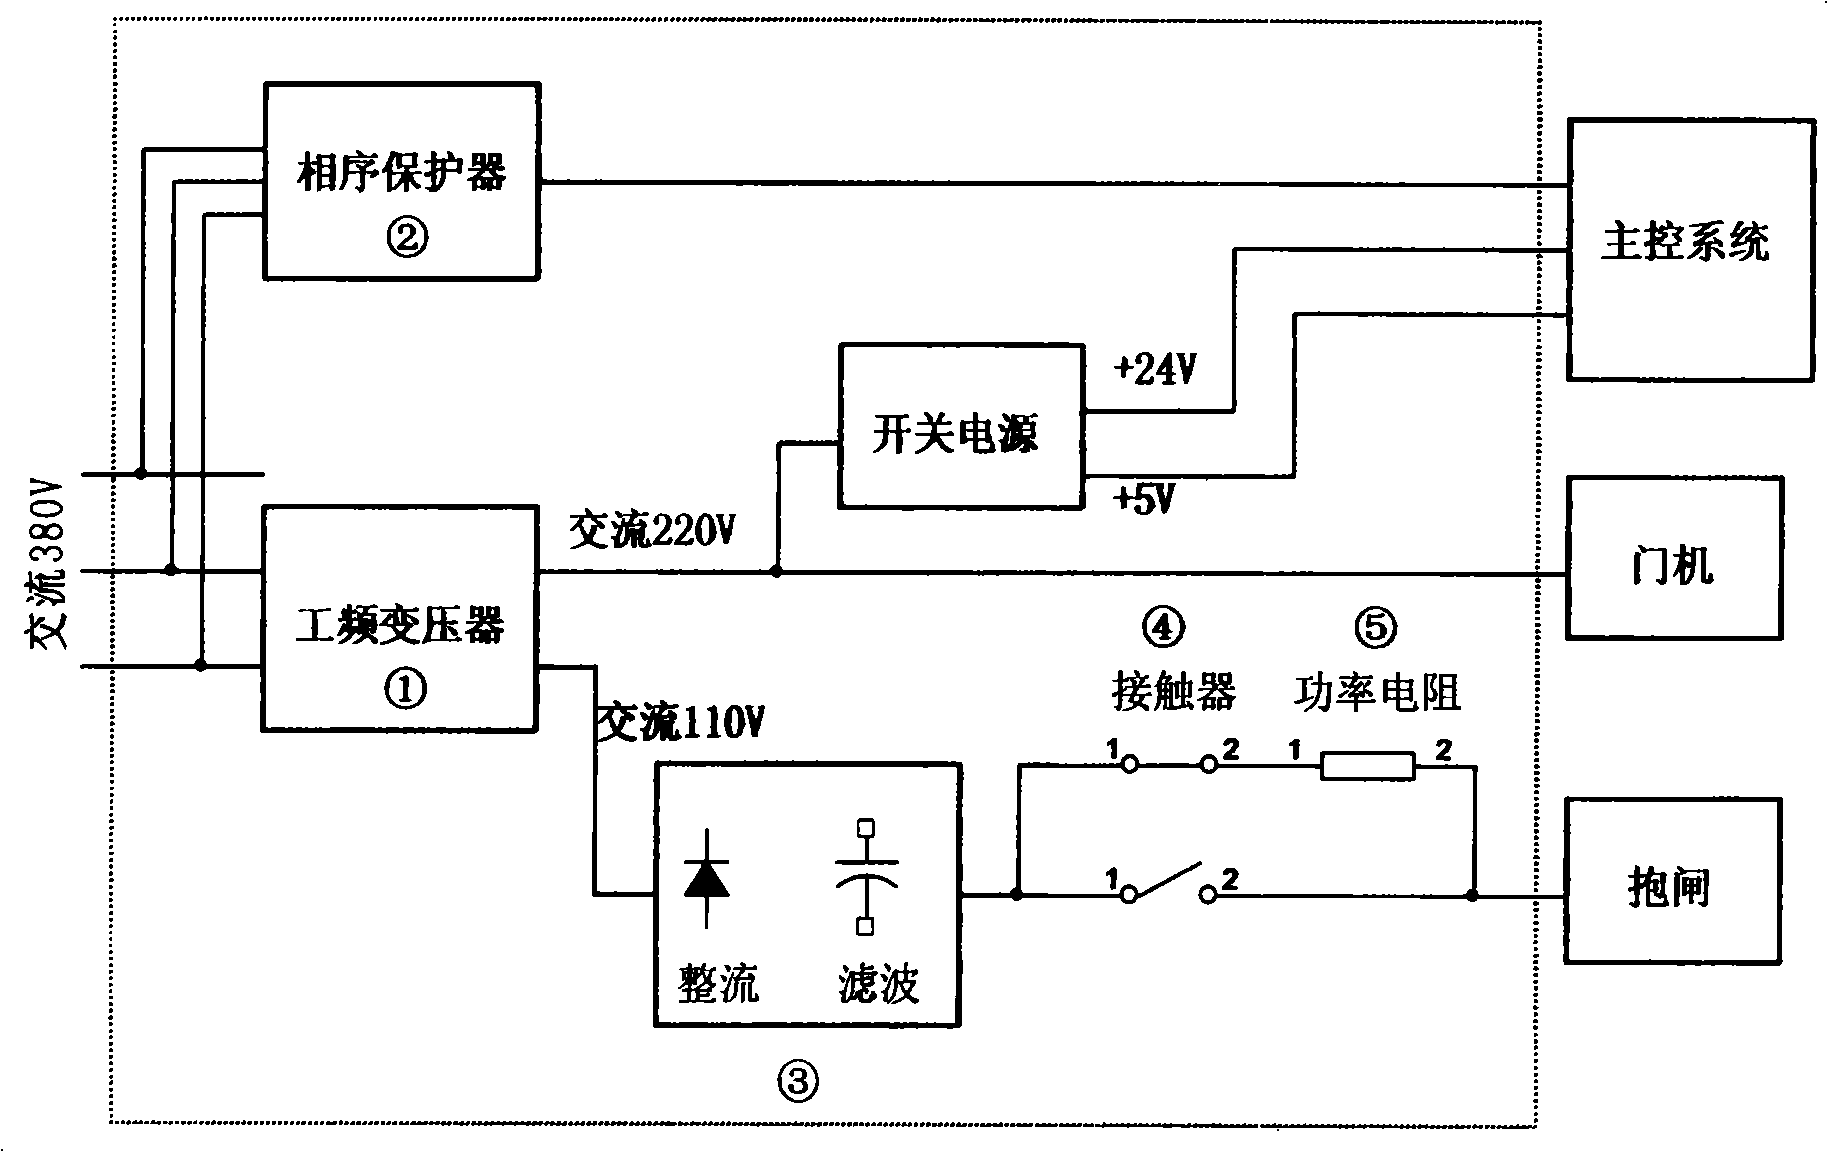 Intelligent integrated elevator system assistant power device